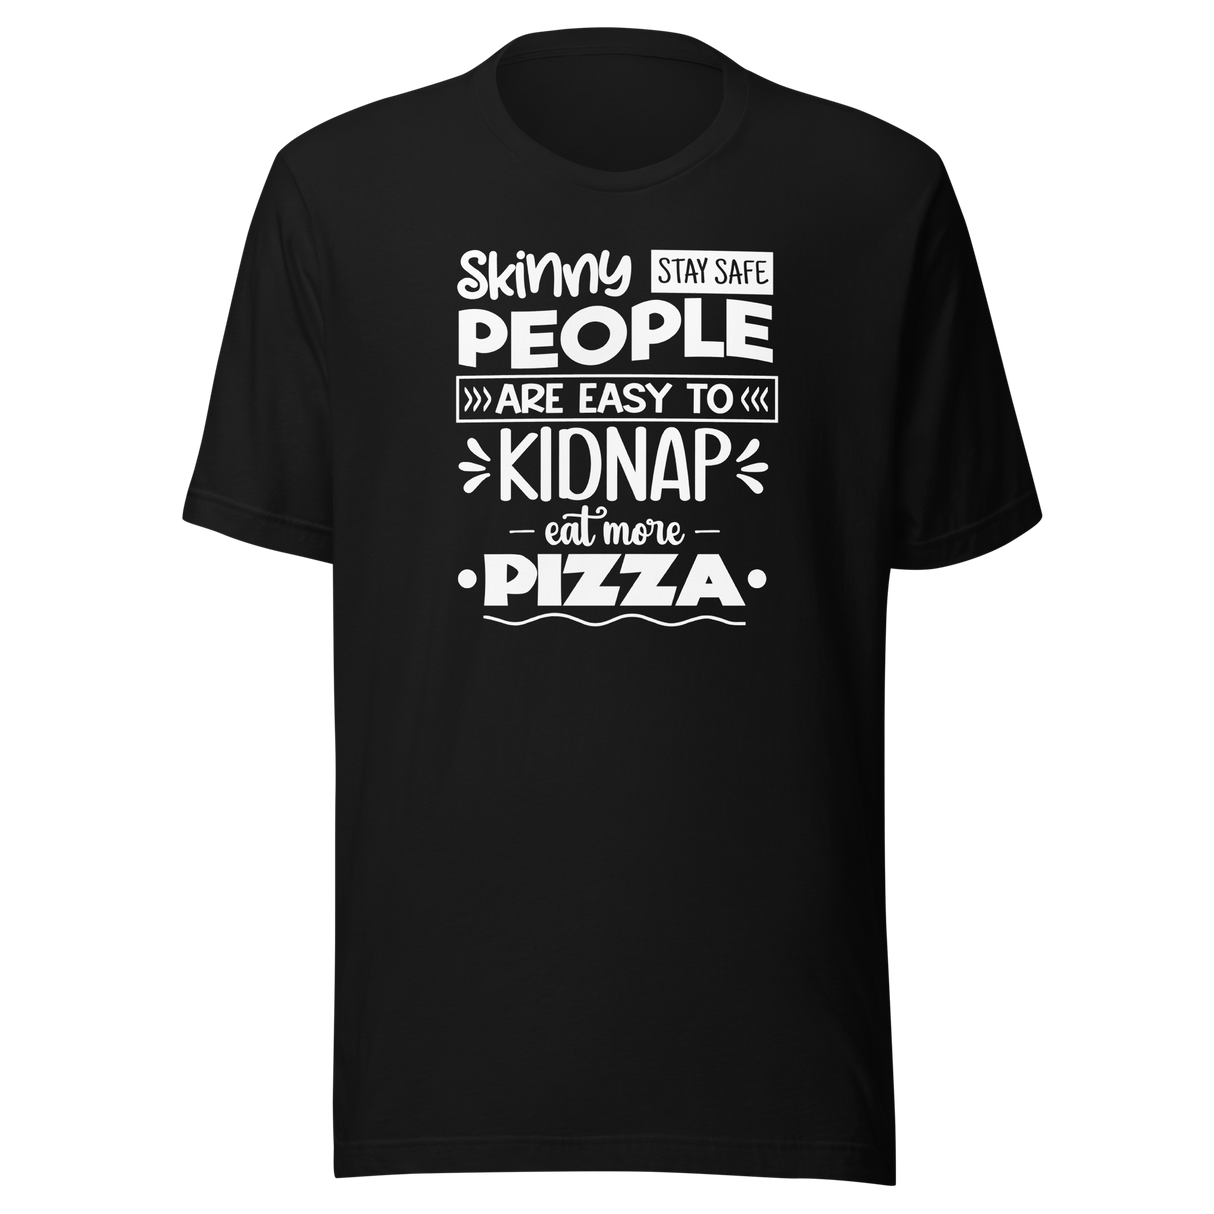 Skinny People Are Easy To Kidnap Eat More Pizza Stay Safe - Food Tee - Life T-Shirt - Pizza Tee - Food T-Shirt - Humor Tee